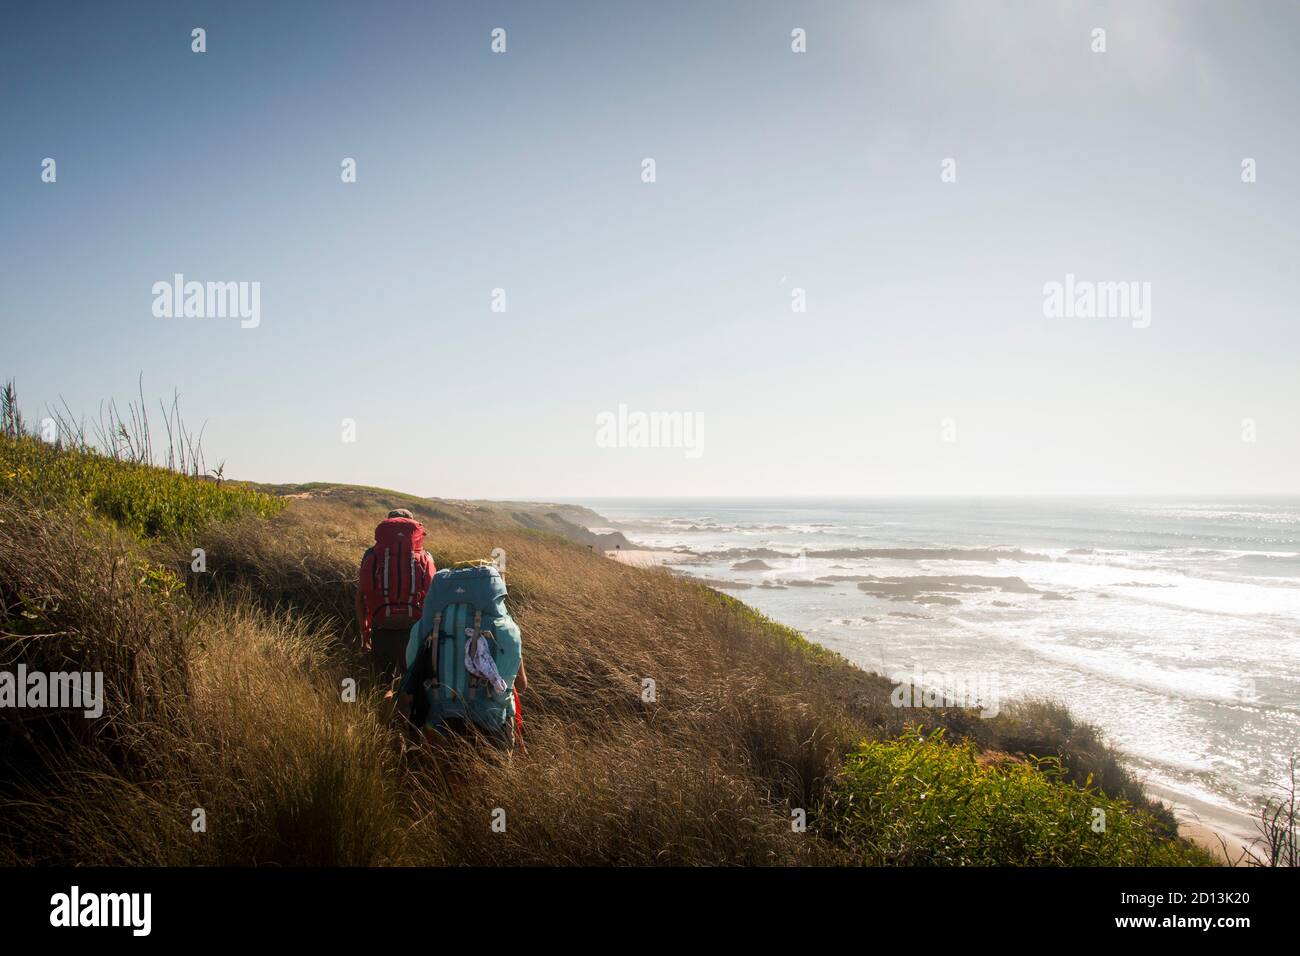 Two hikers walk the trail along the dunes and cliffs with tall vegetation, standing aside a beach landscape on late evening Stock Photo